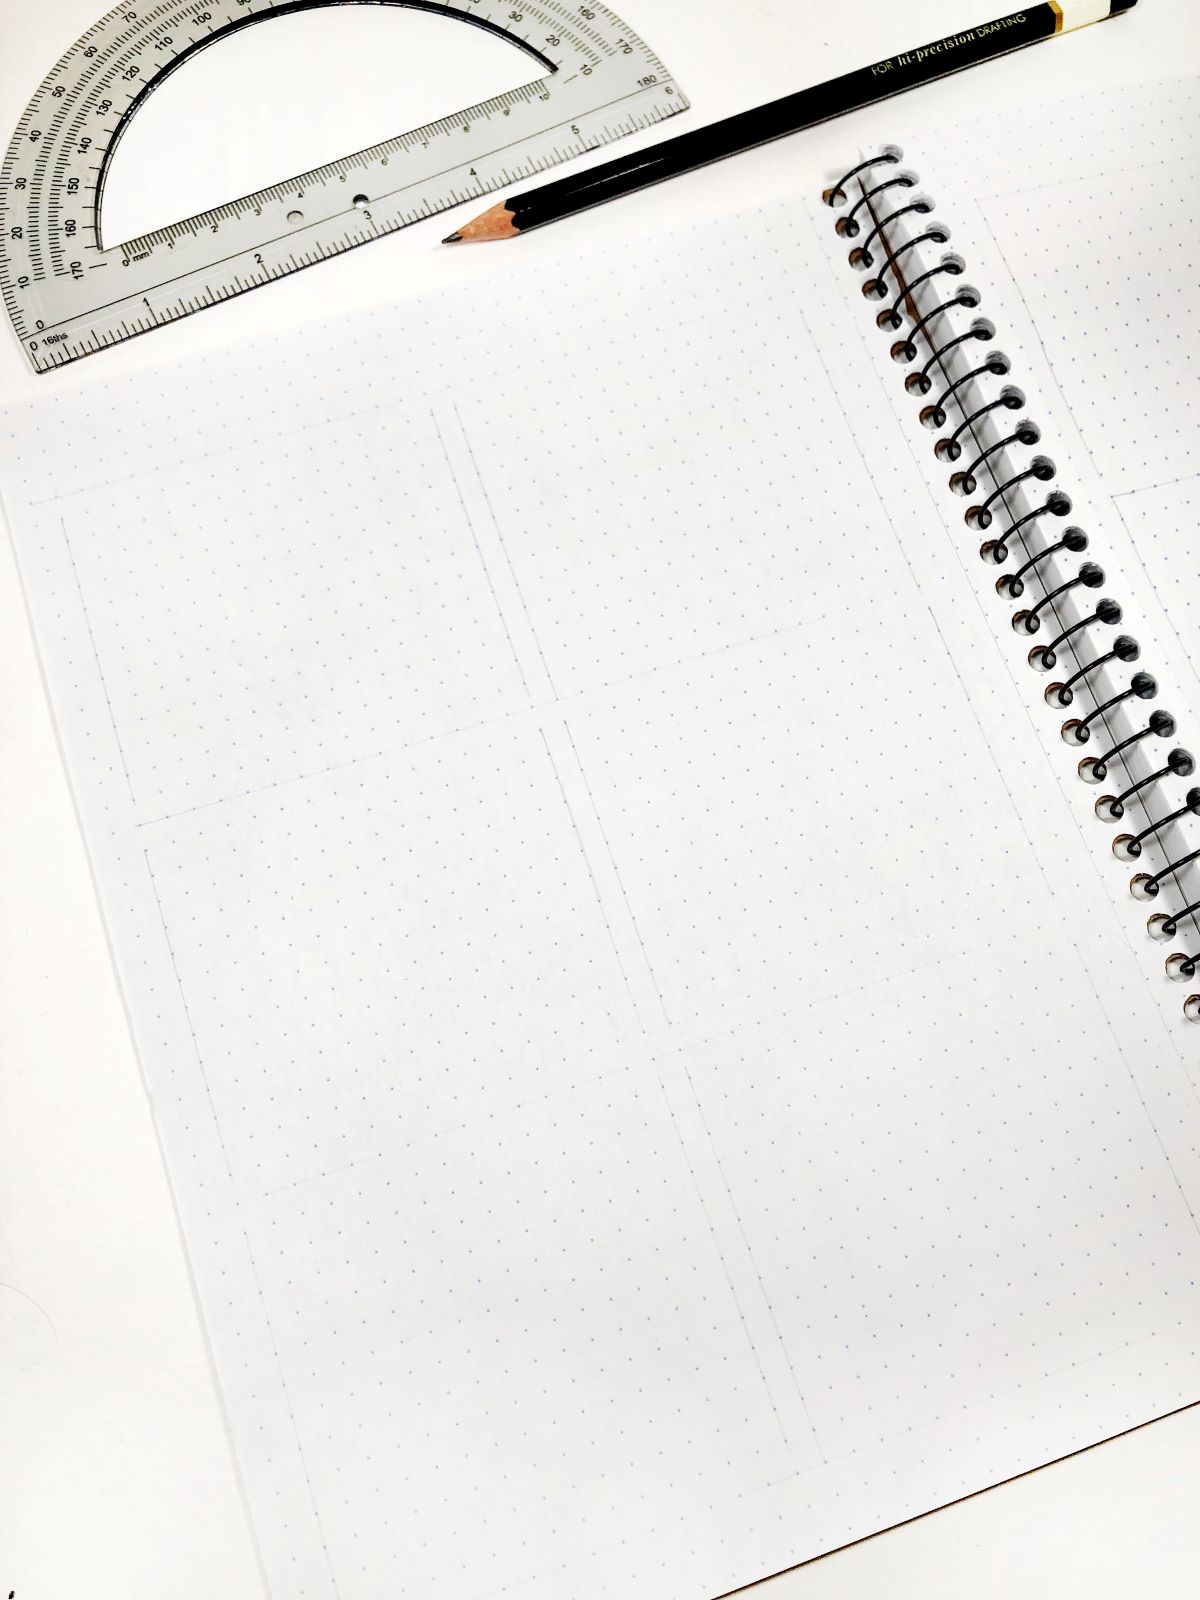 Create a Birthday Tracker with Tombow and Decomposition Book. #tombow #journal